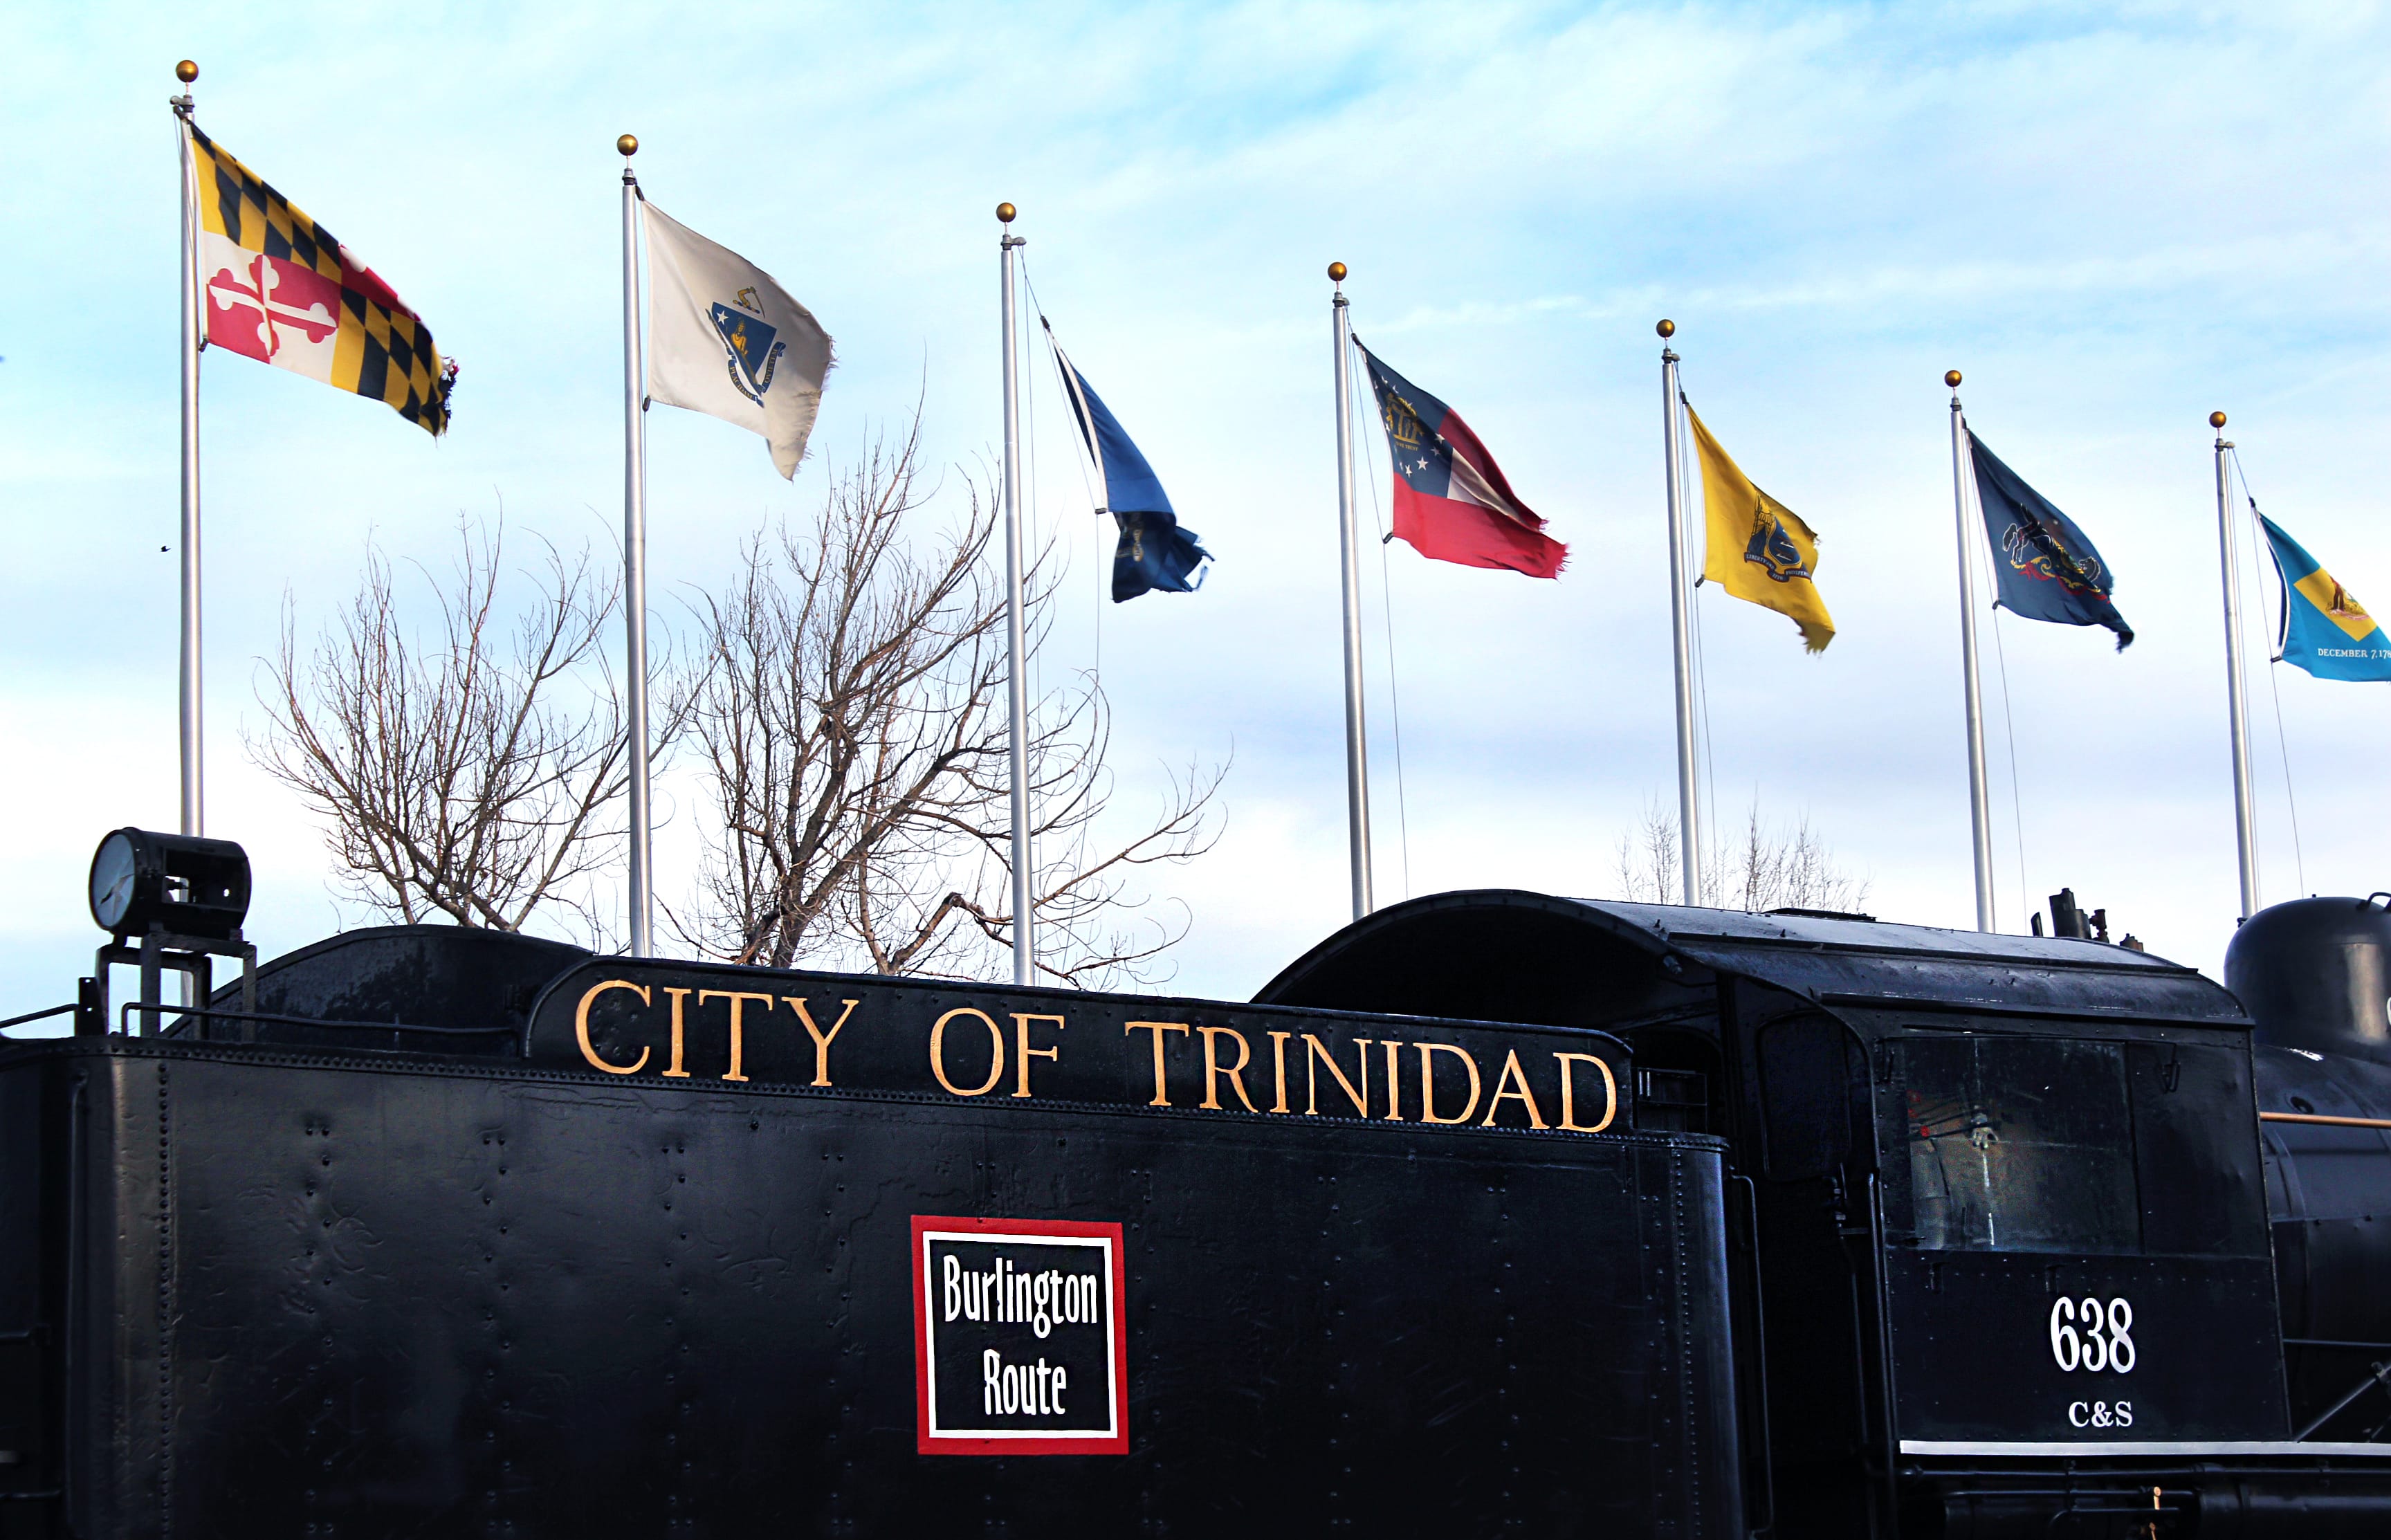 Image of freight train with flags